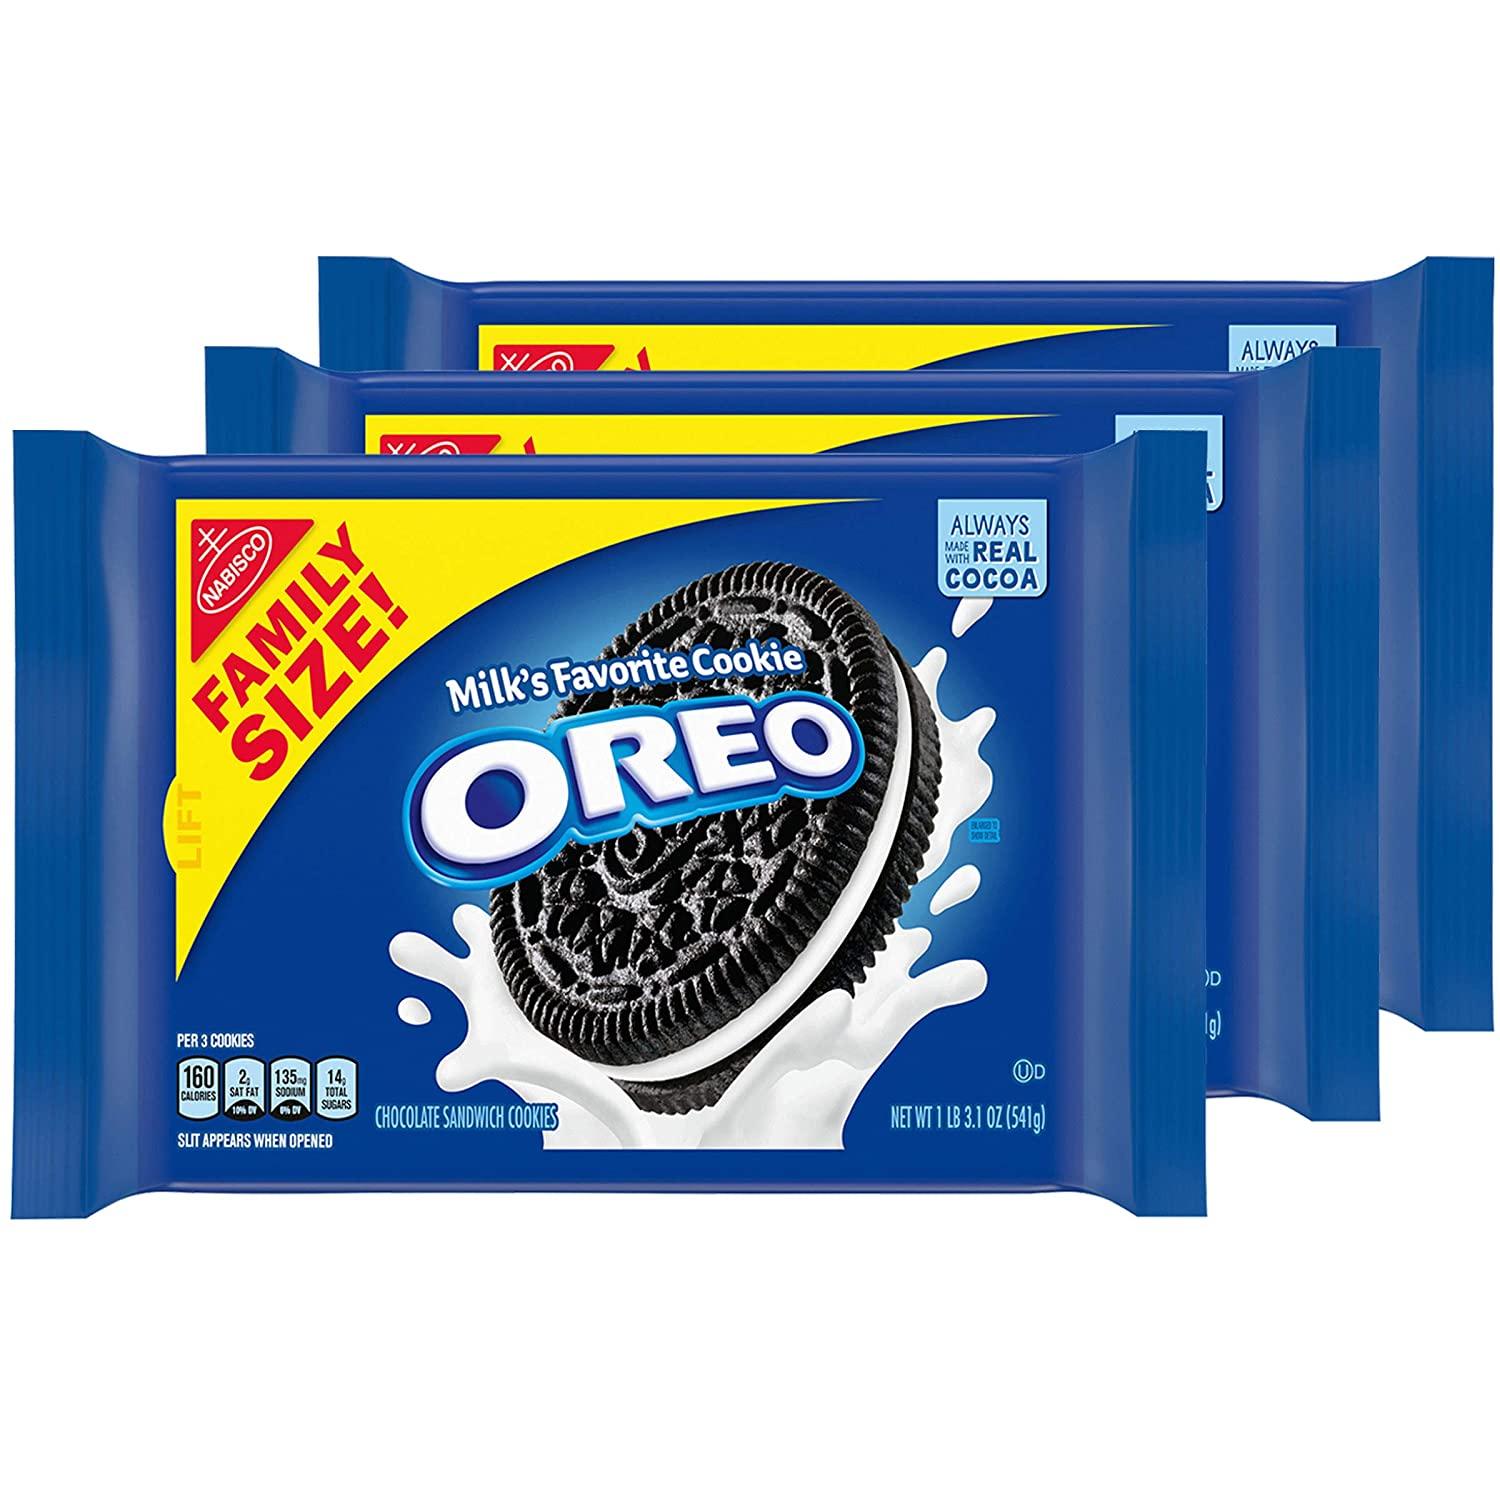 3 Oreo Chocolate Sandwich Cookies for $10.46 Shipped